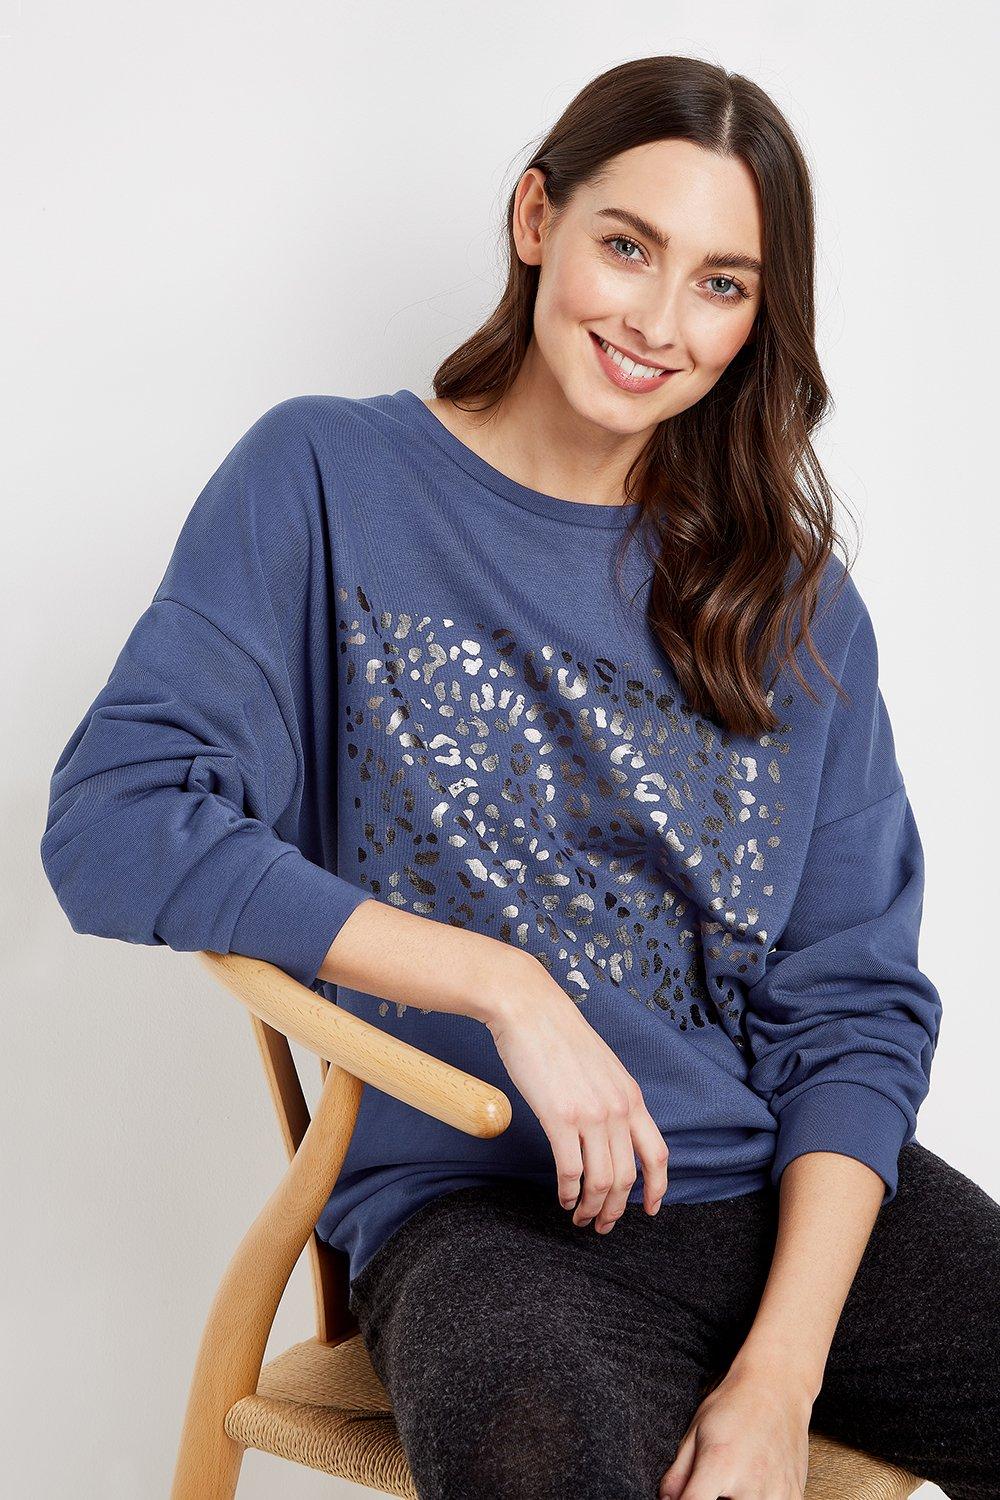 The Cosy Jumper That Has It All - Animal Print, A Touch Of Sparkle, And Super Cosy Feel. A Relaxed Fit And Laid-Back Hue Will Have You Wearing This On-Repeat, Just Team With Faux Leather Leggings And Chunk Ankle Boots To Complete The Look.   Jumper Round